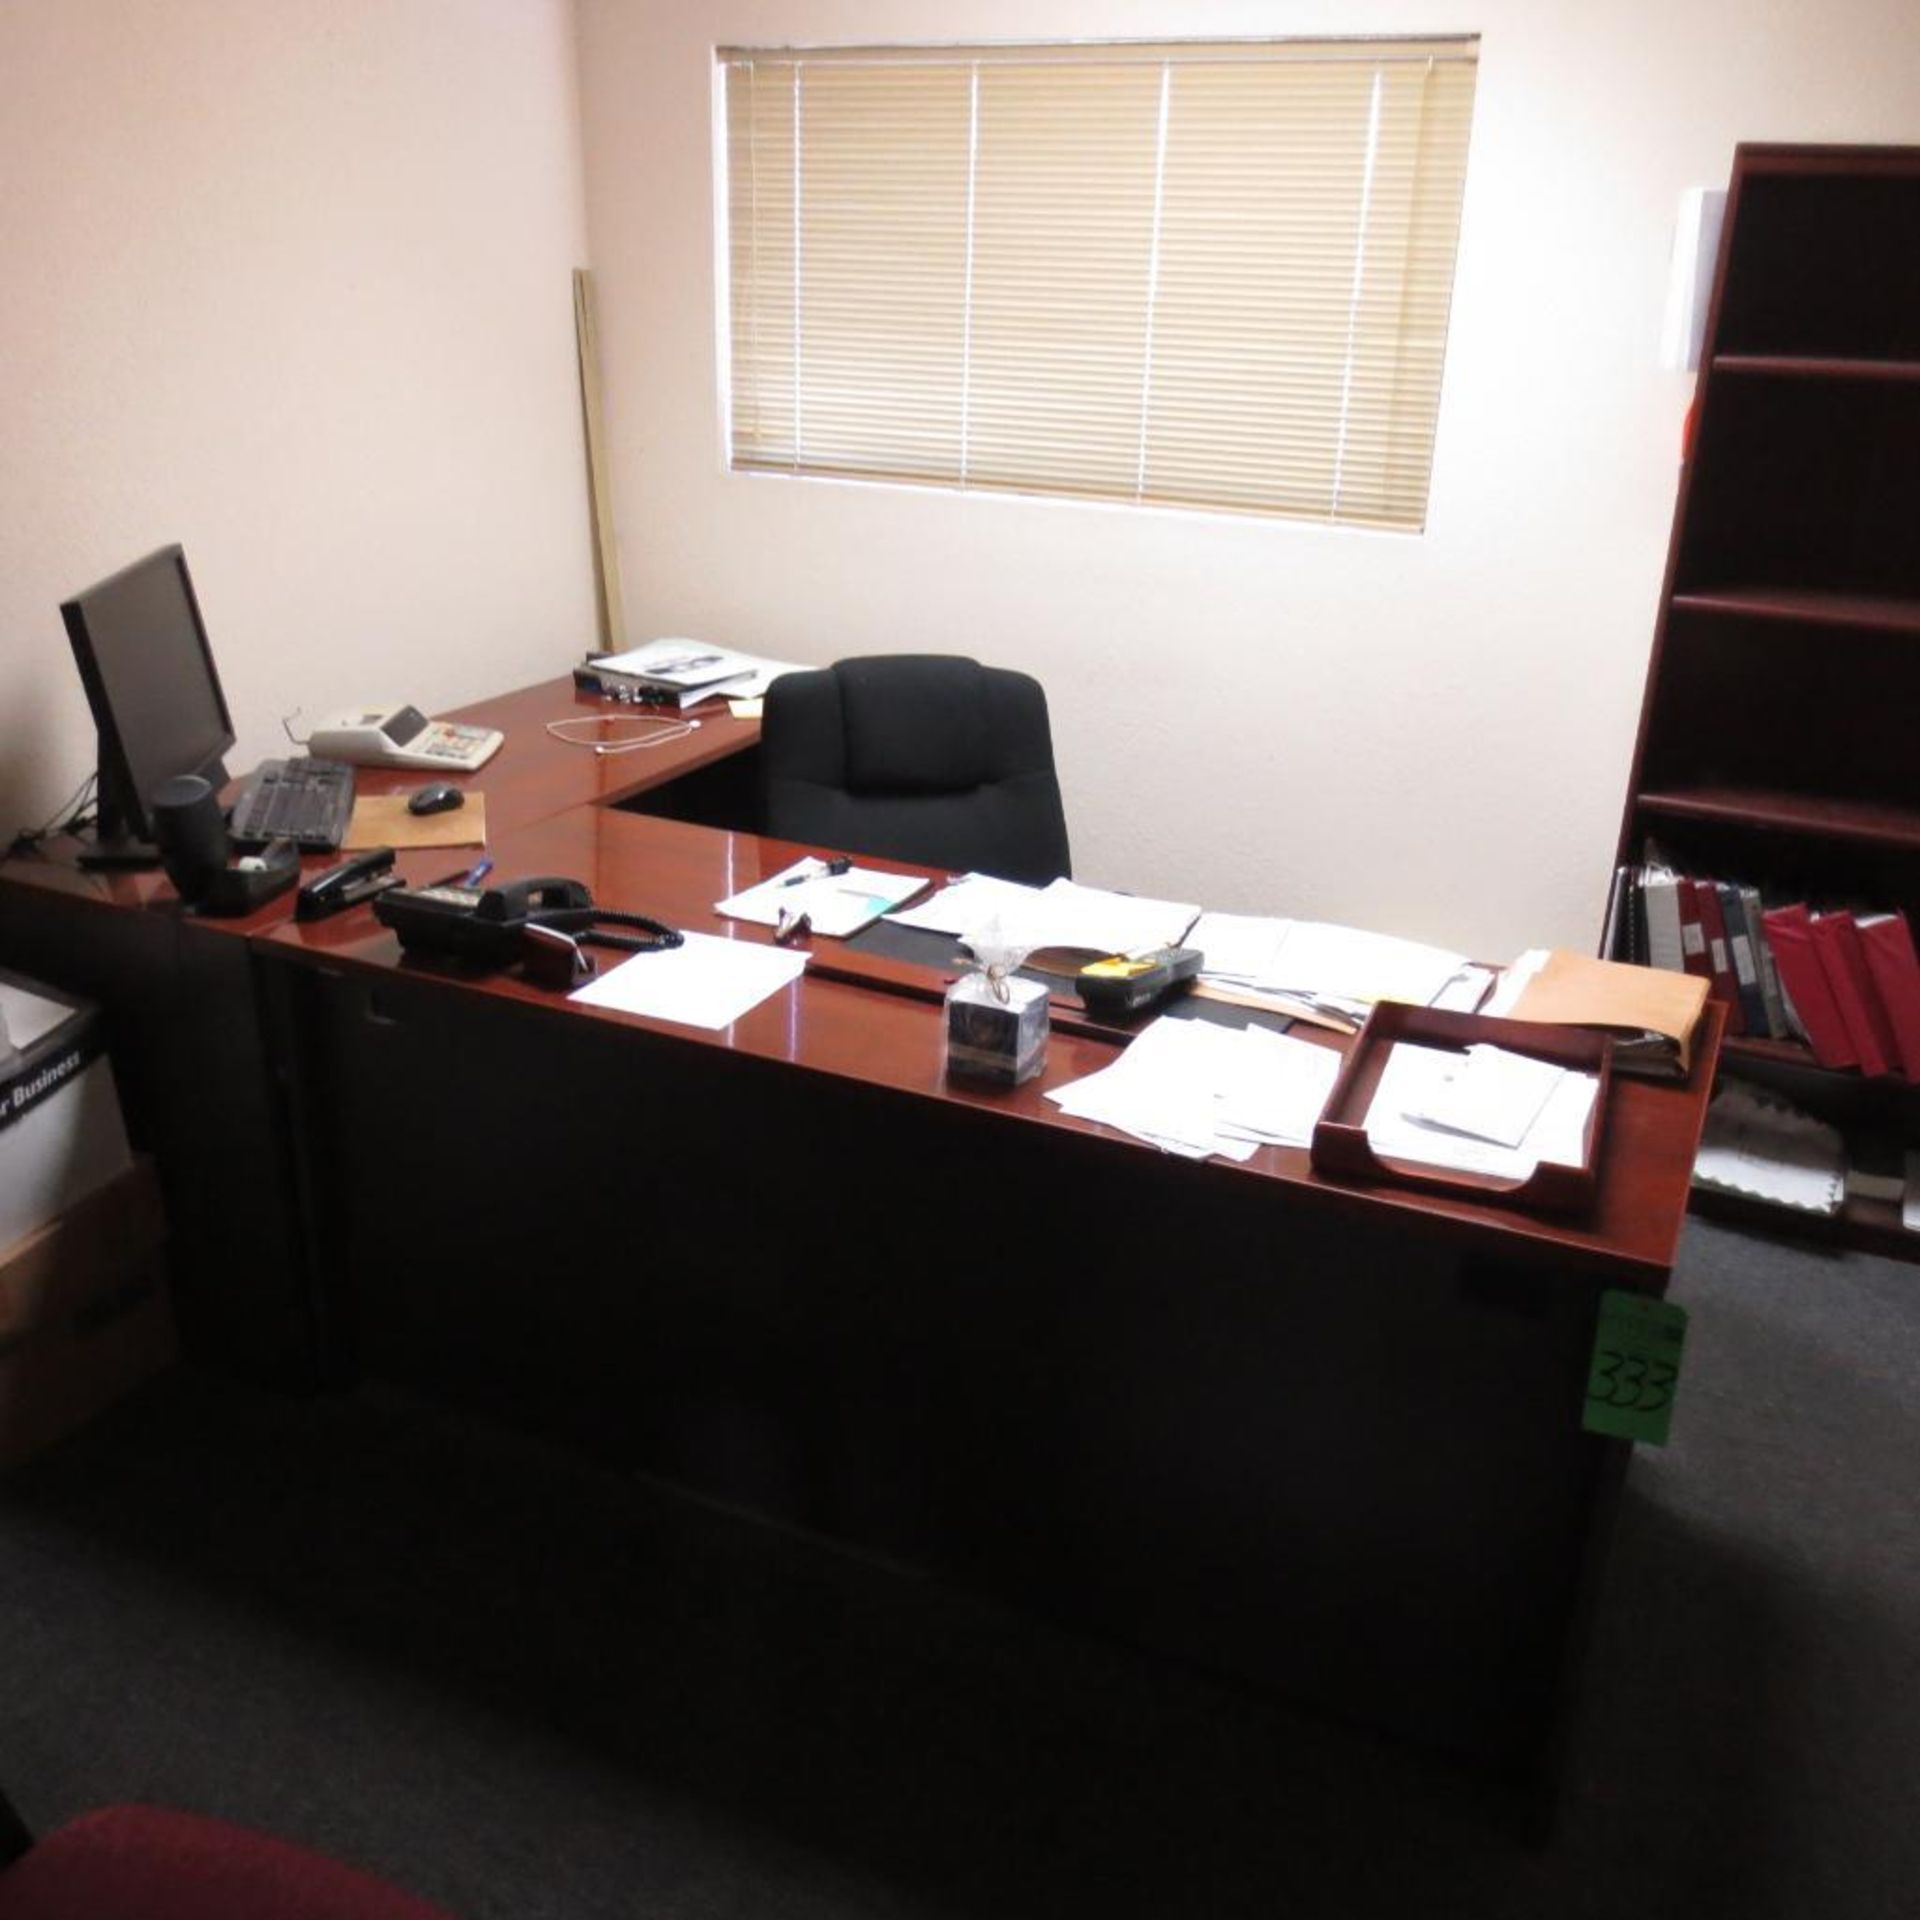 Desk, Chairs, File Cabinets and Computer (No Paper Work )